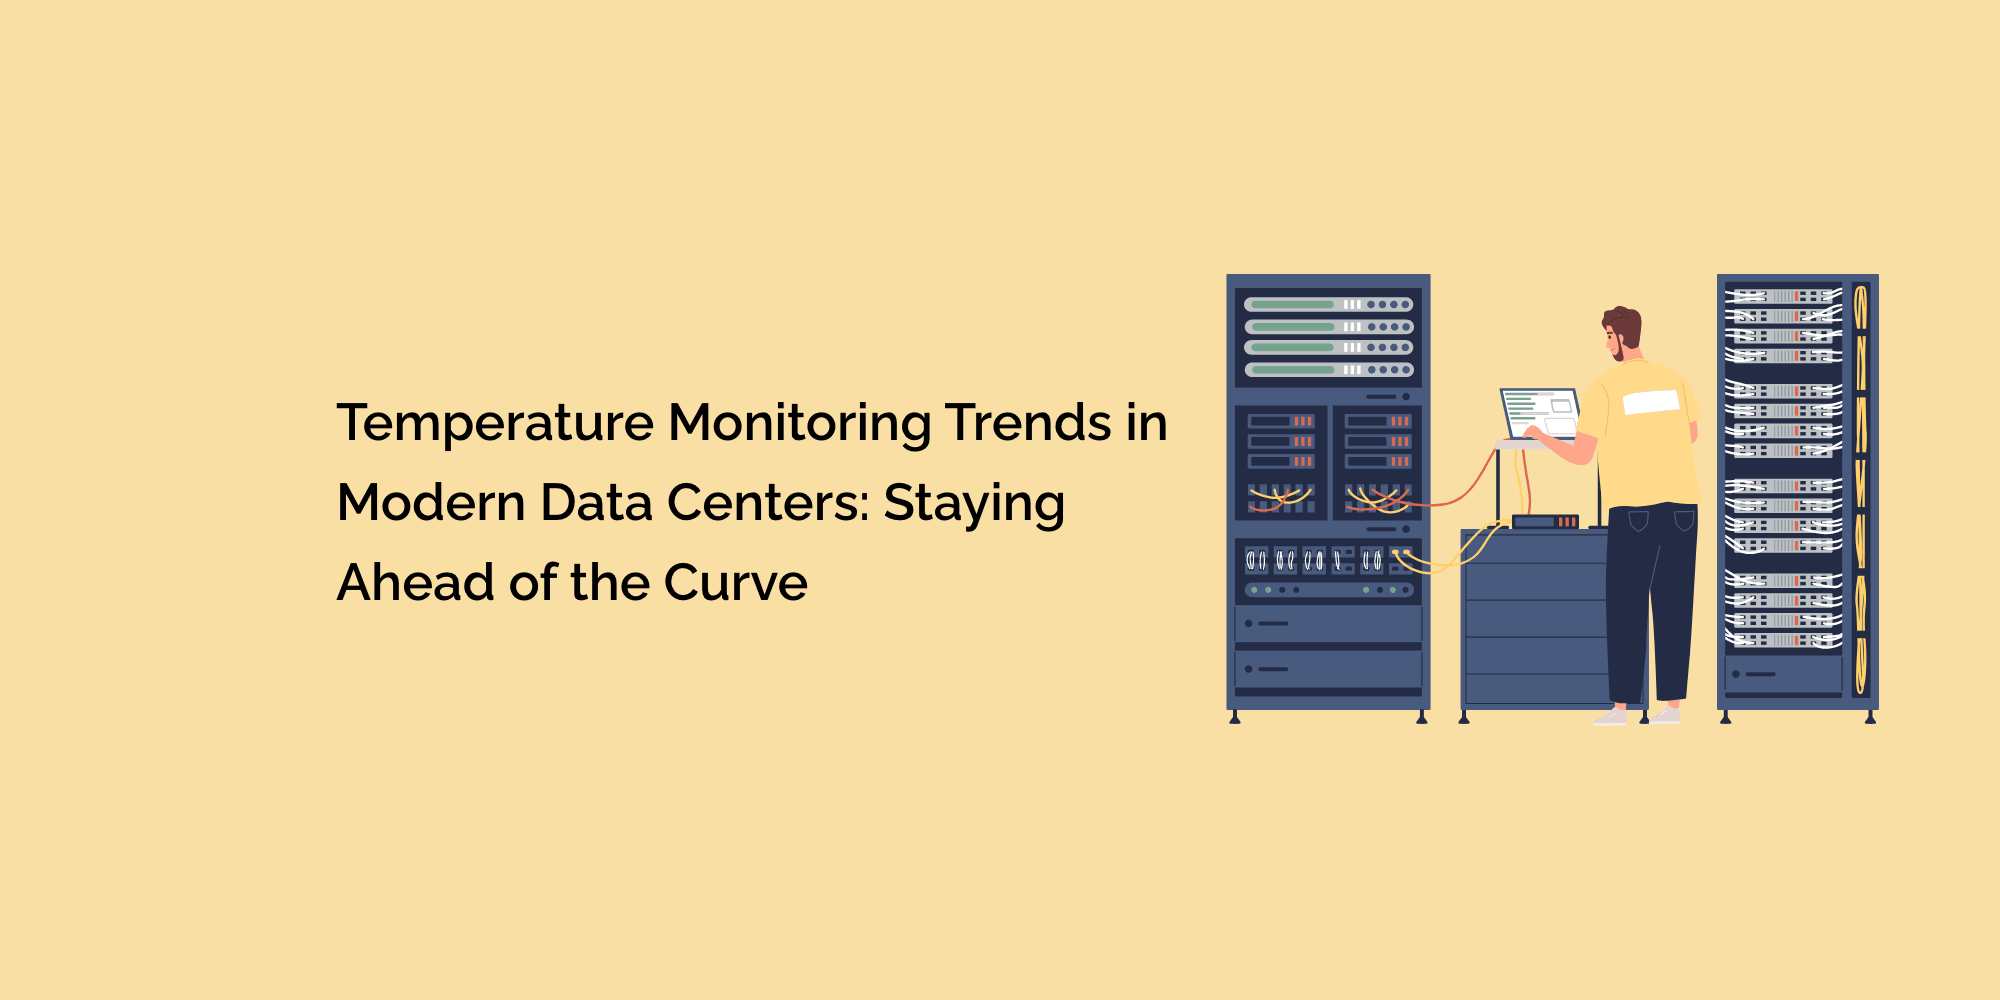 Temperature Monitoring Trends in Modern Data Centers: Staying Ahead of the Curve